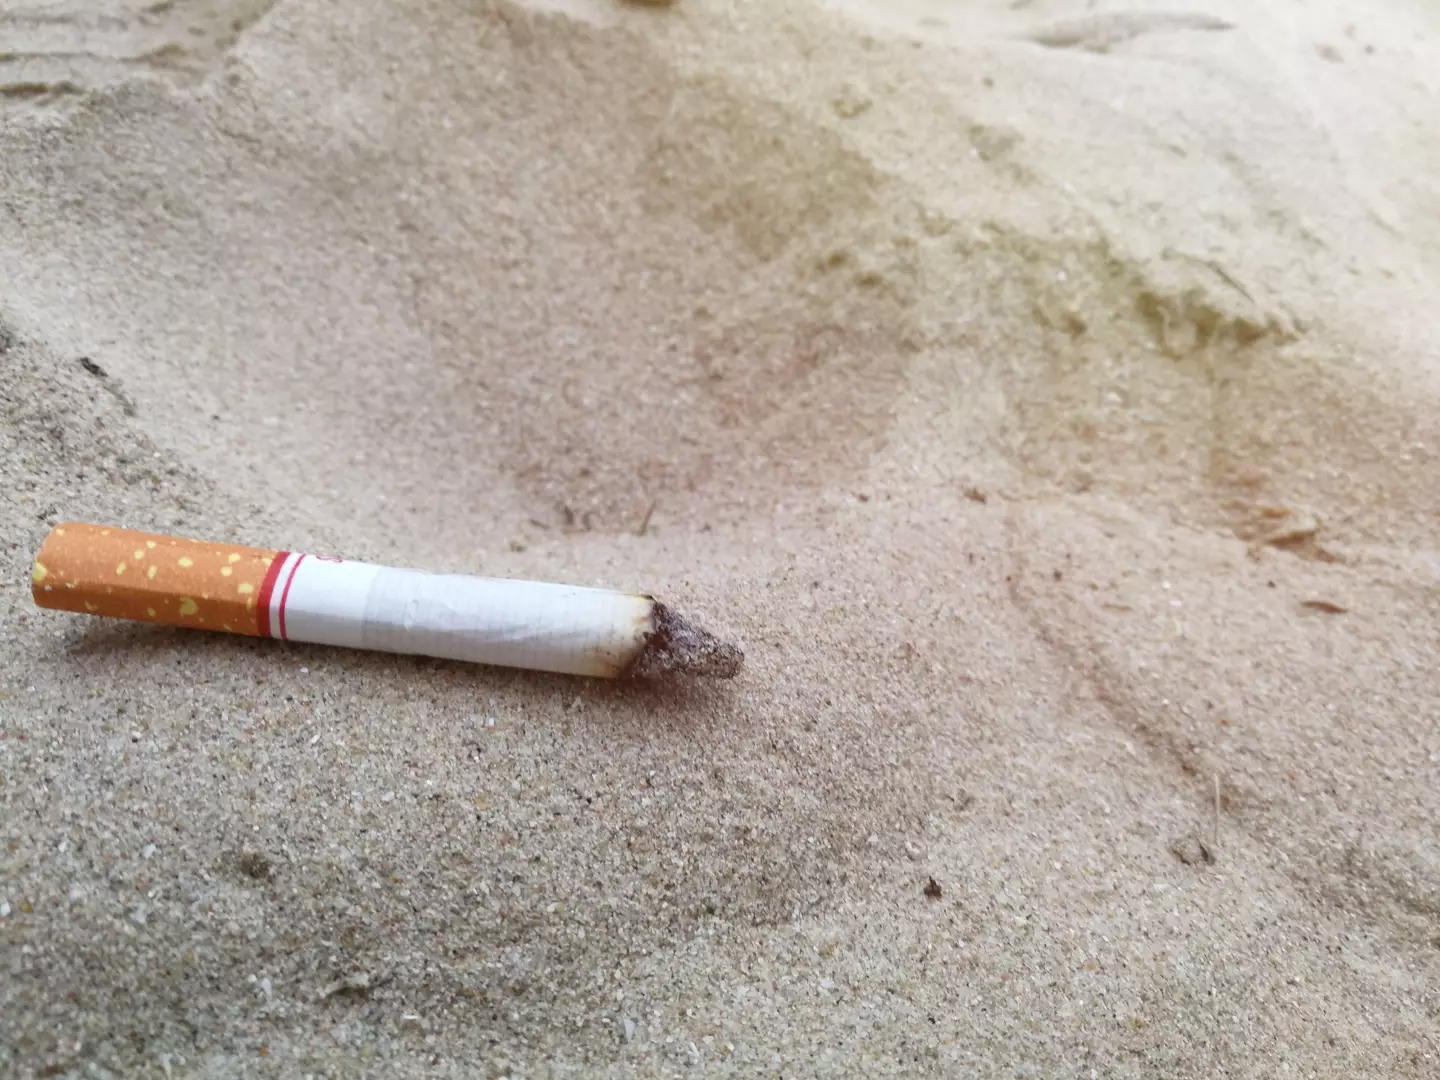 Many cigarettes end up on beaches and in oceans.